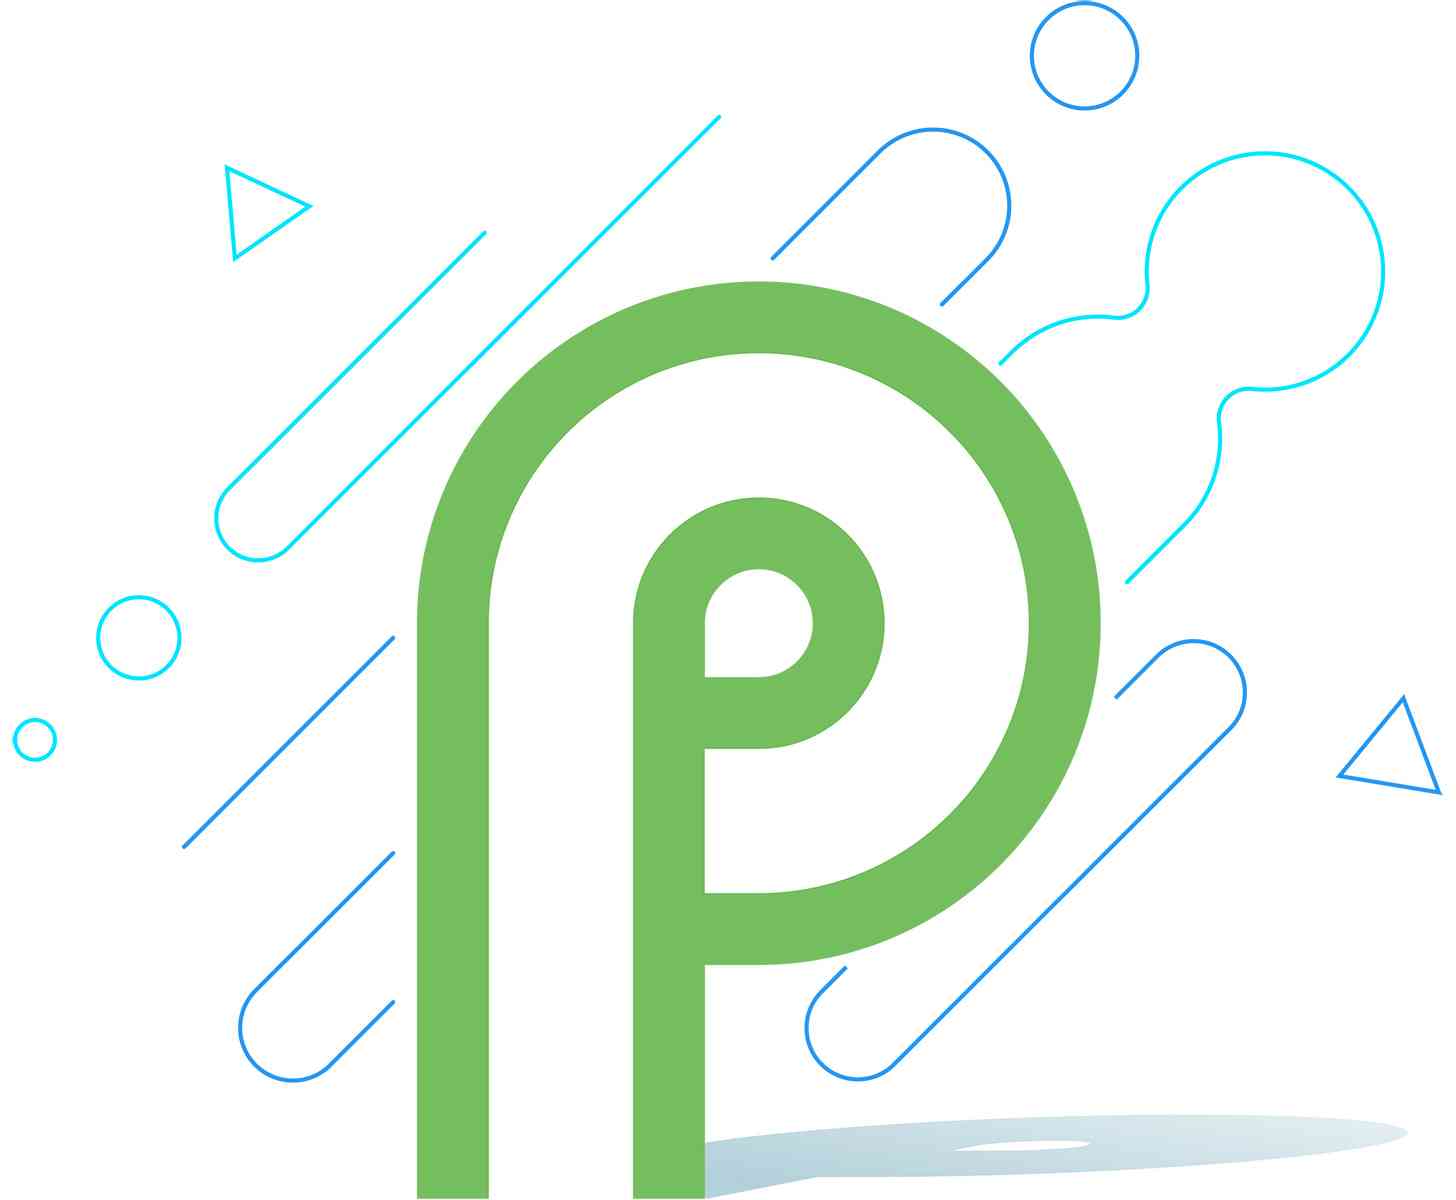 Android P logo